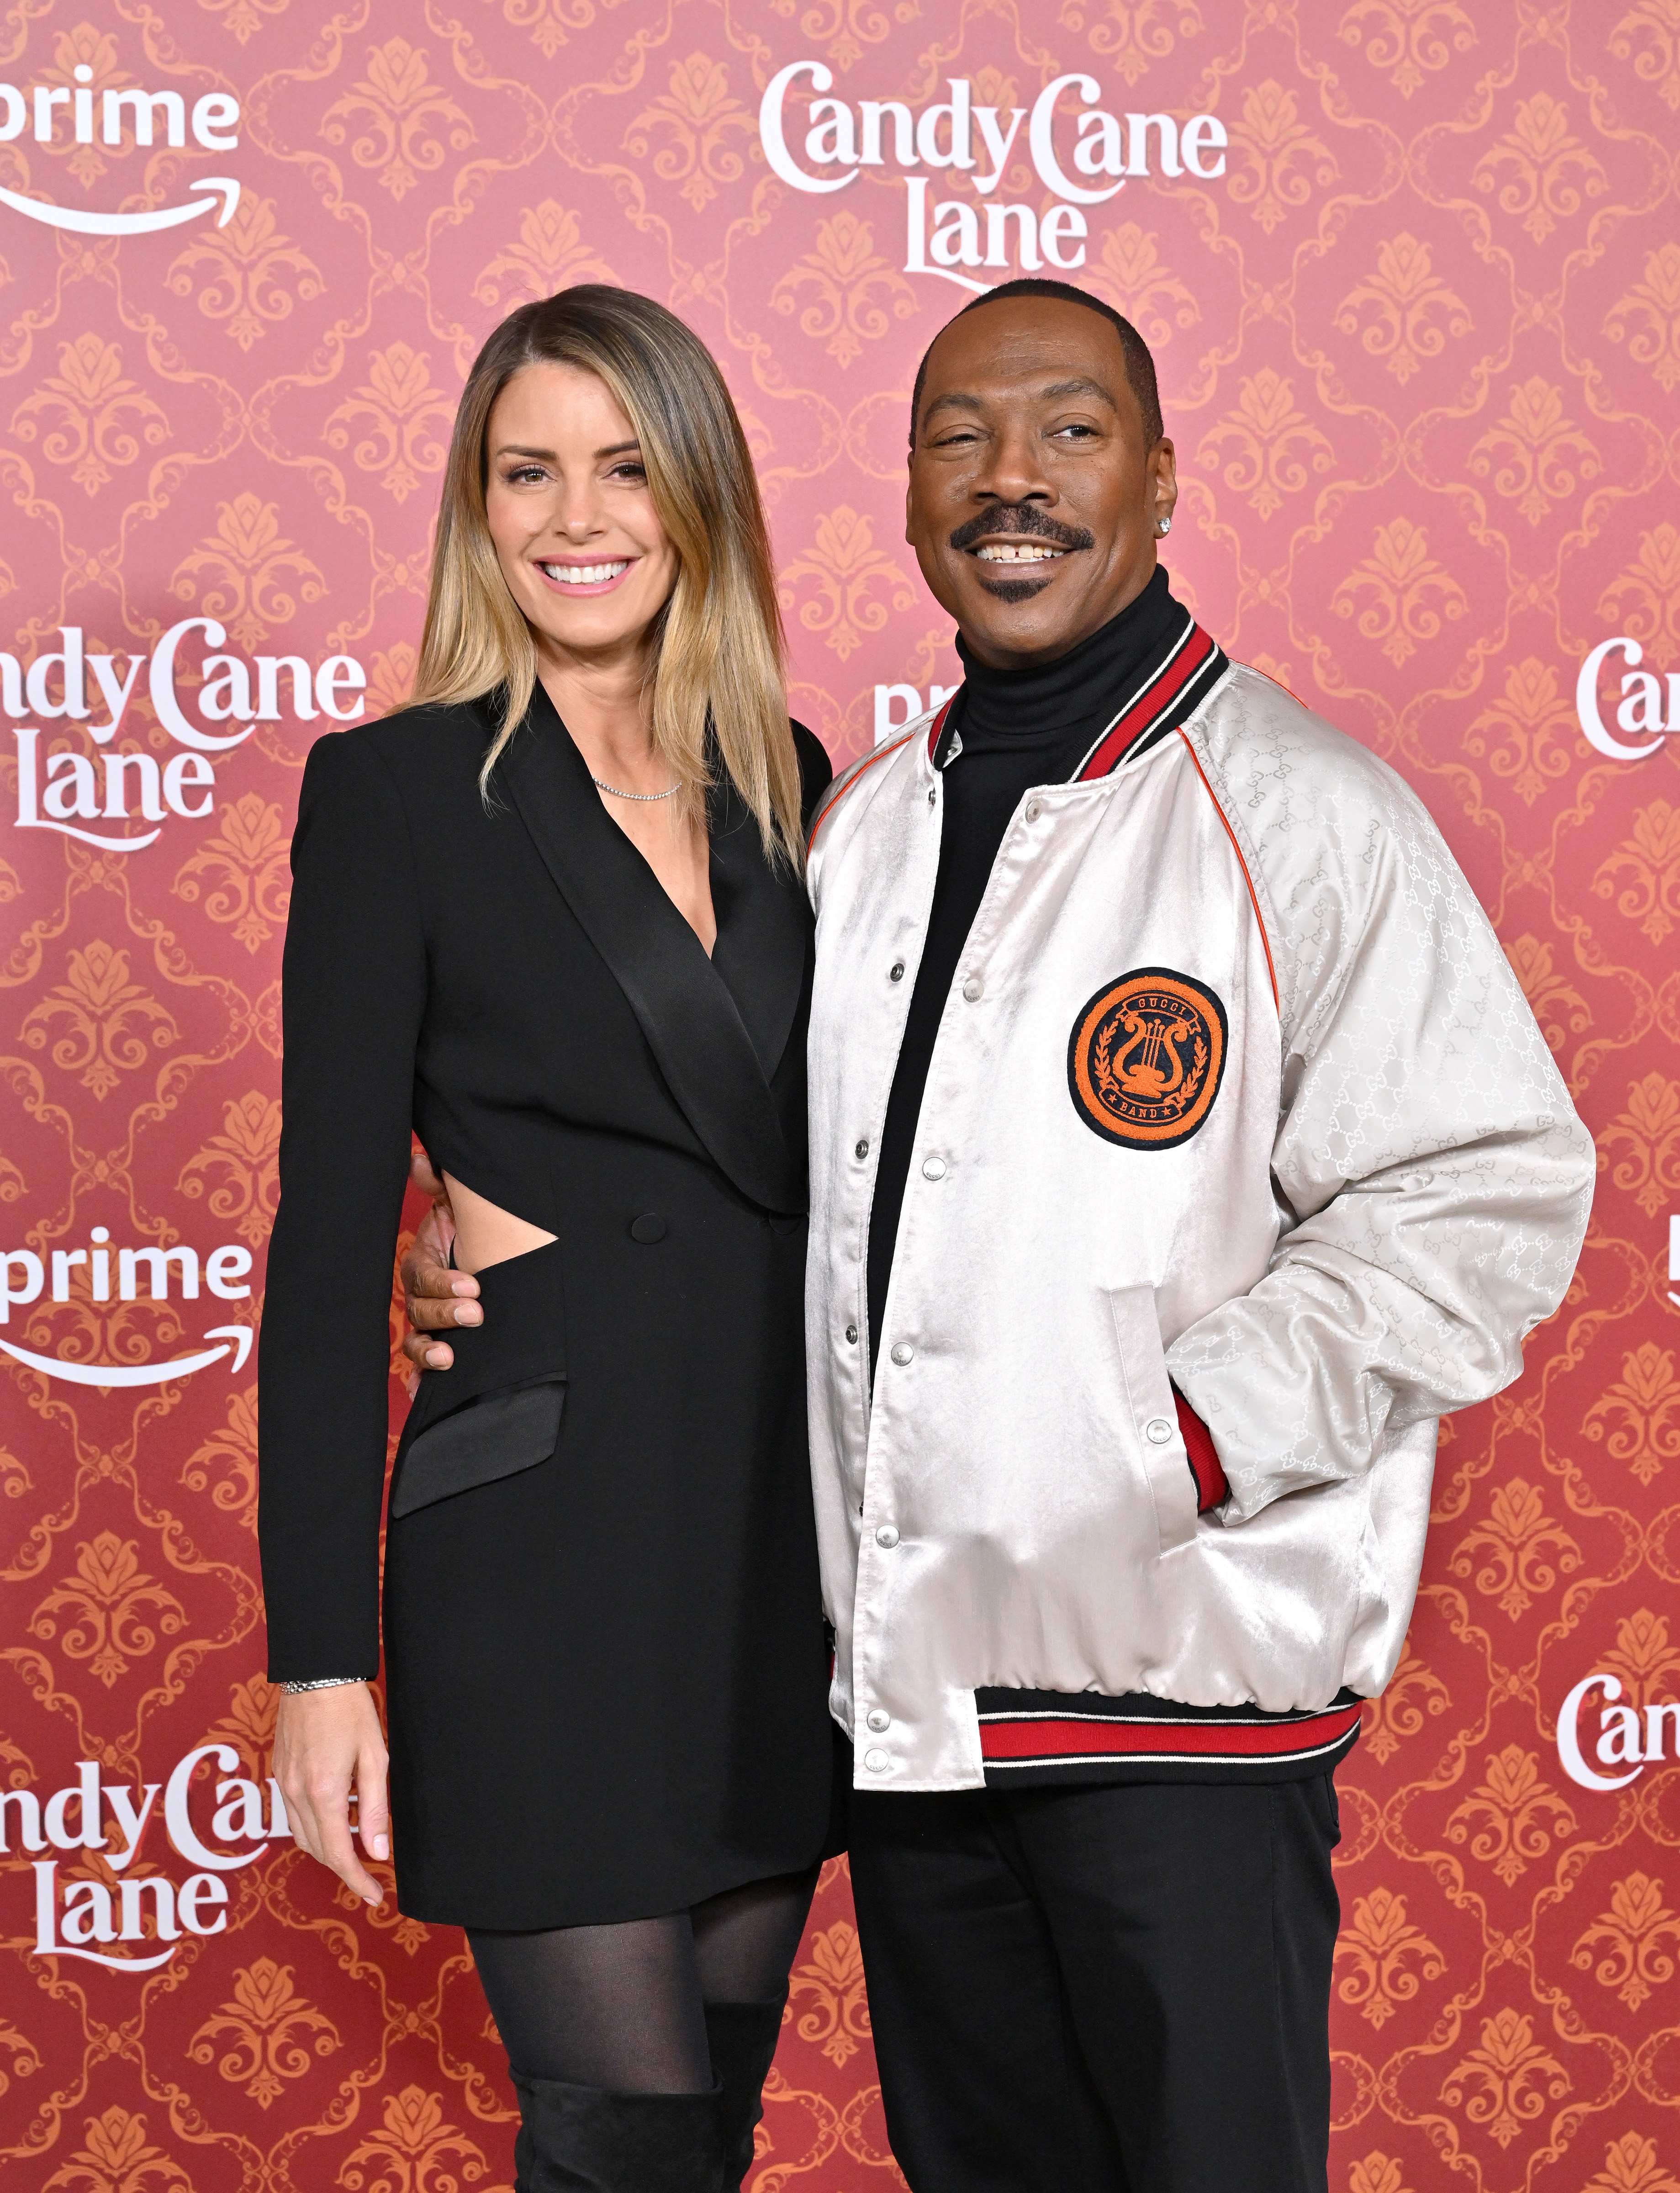 Two celebrities on a branded backdrop; woman in black dress, man in jacket with logo